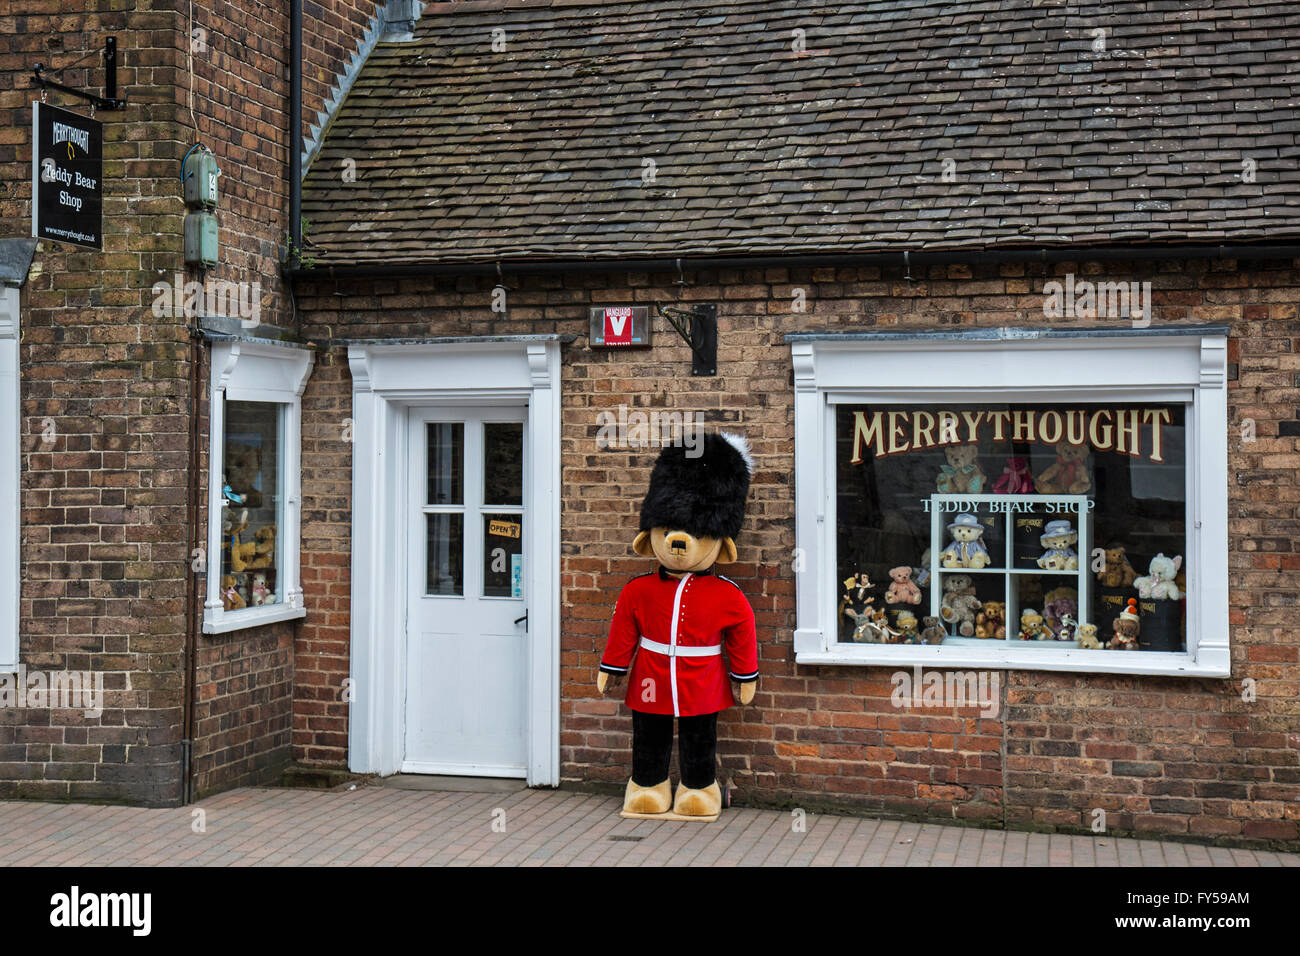 Large Teddy Bear outside the Merrythought Teddy Bear factory in Ironbridge, Shropshire, England. Stock Photo